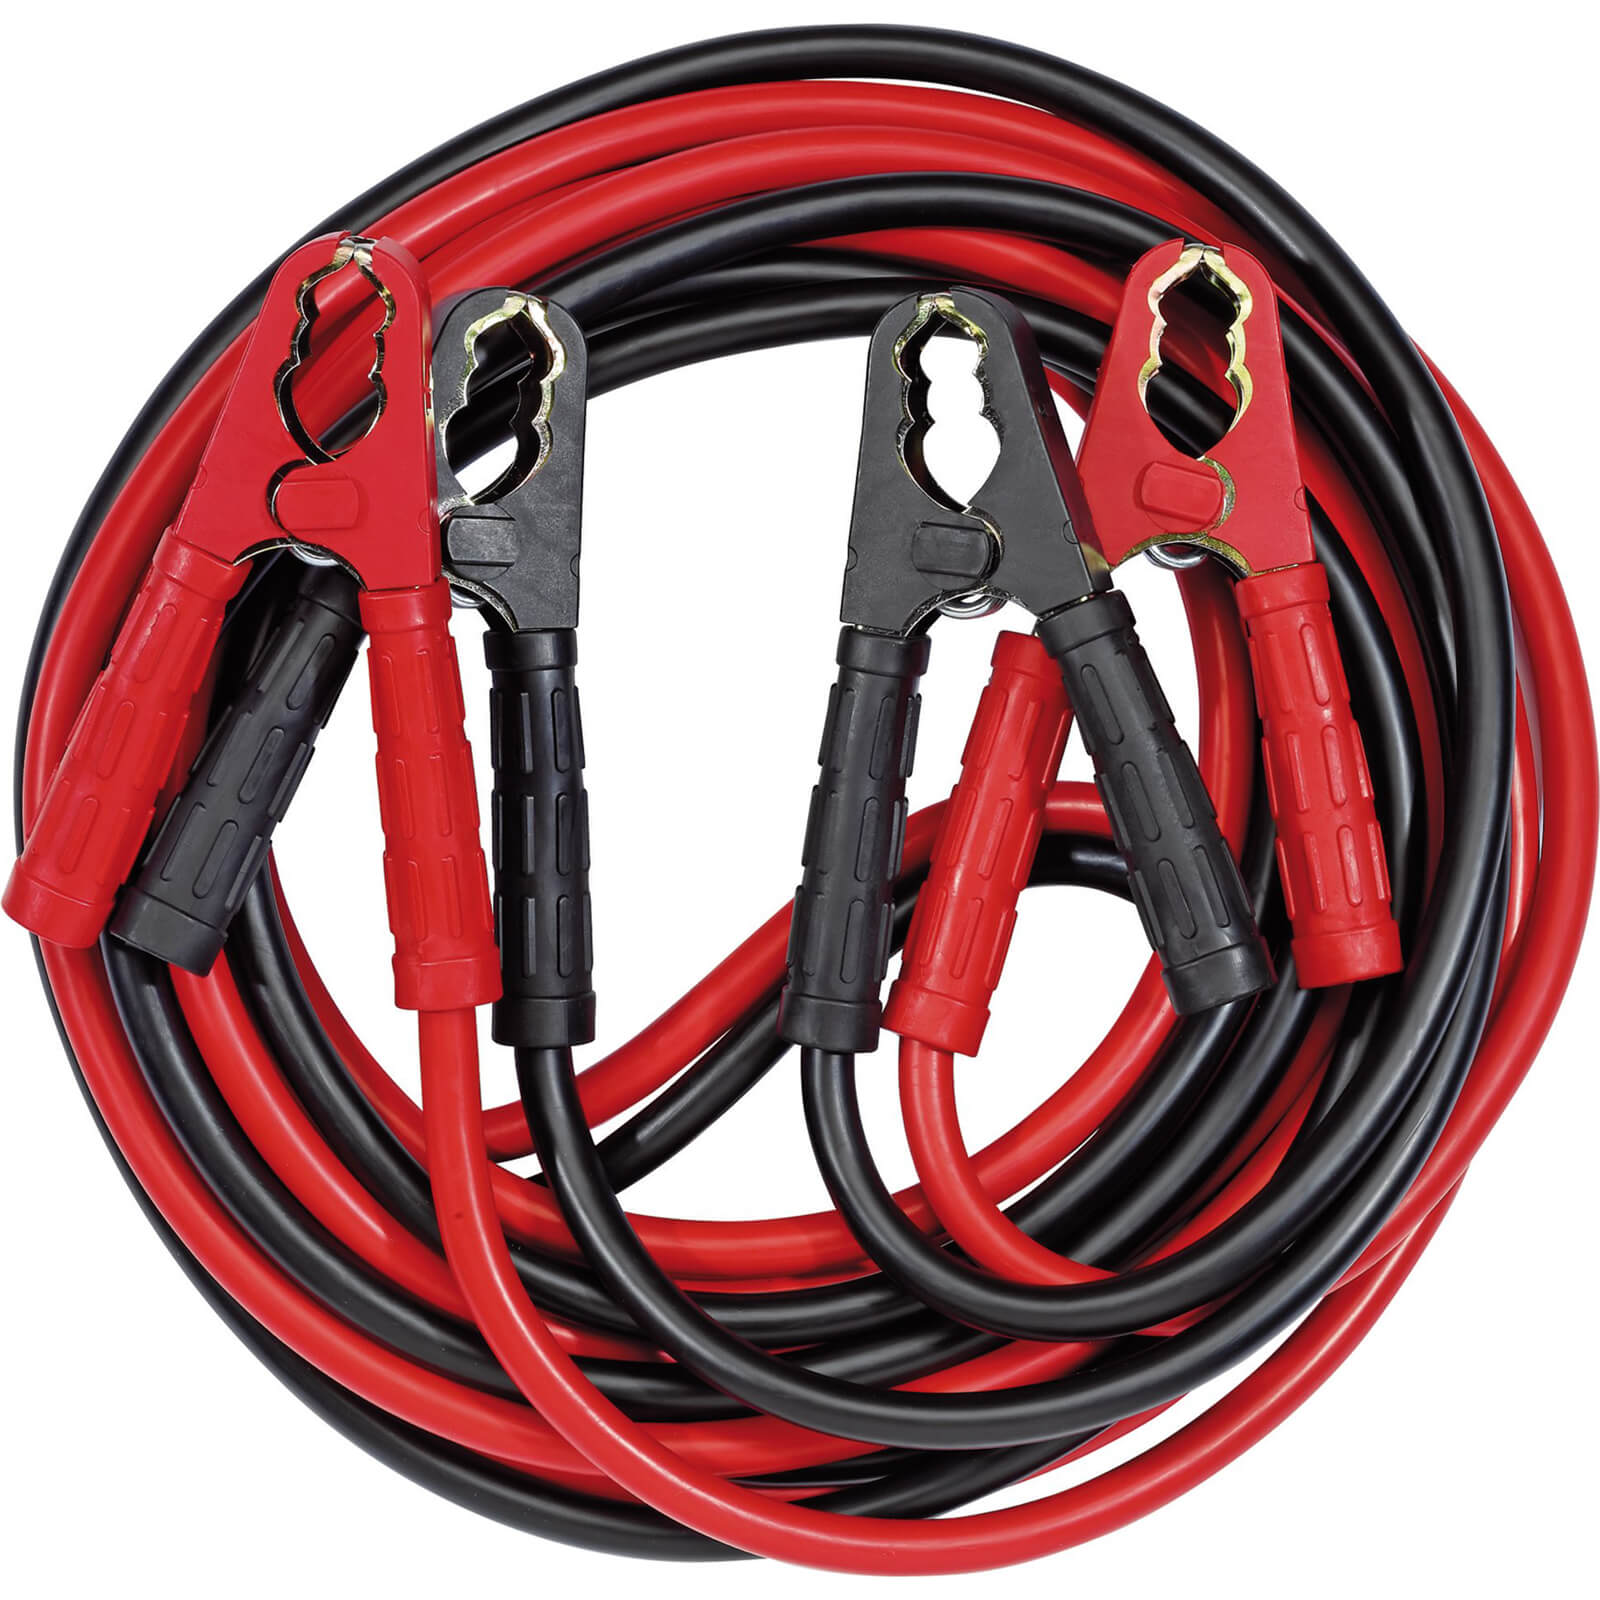 Image of Draper Heavy Duty Booster Cable Jump Leads 50mm 6.5m